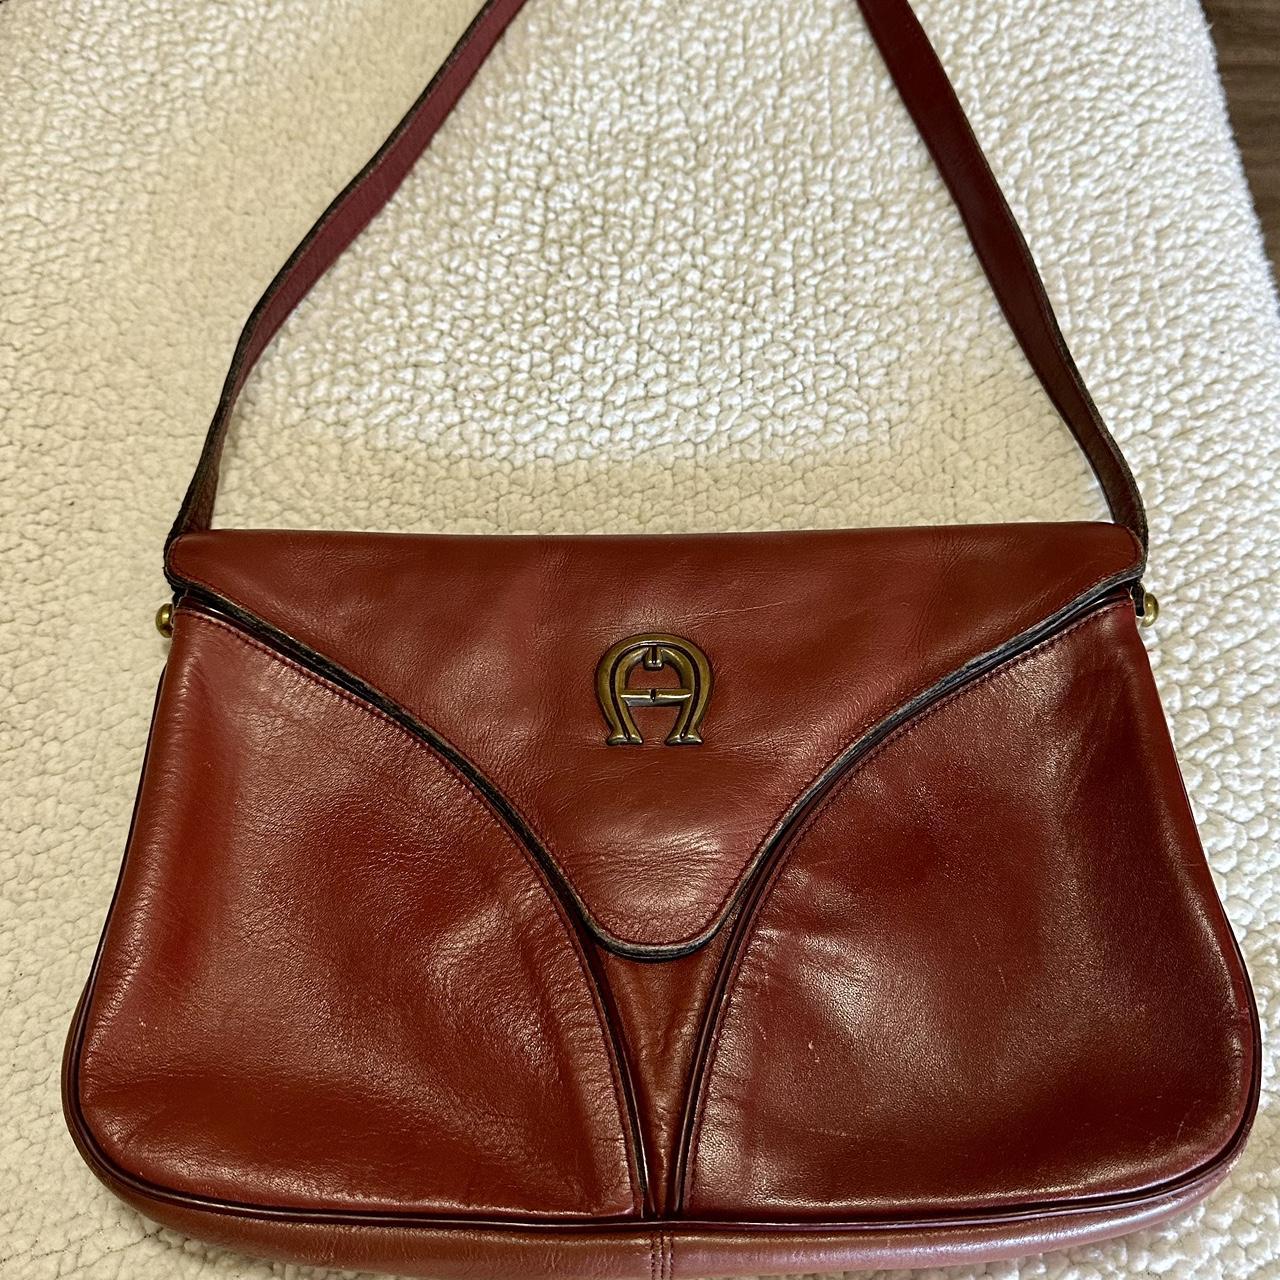 Aigner Women's Brown and Burgundy Bag